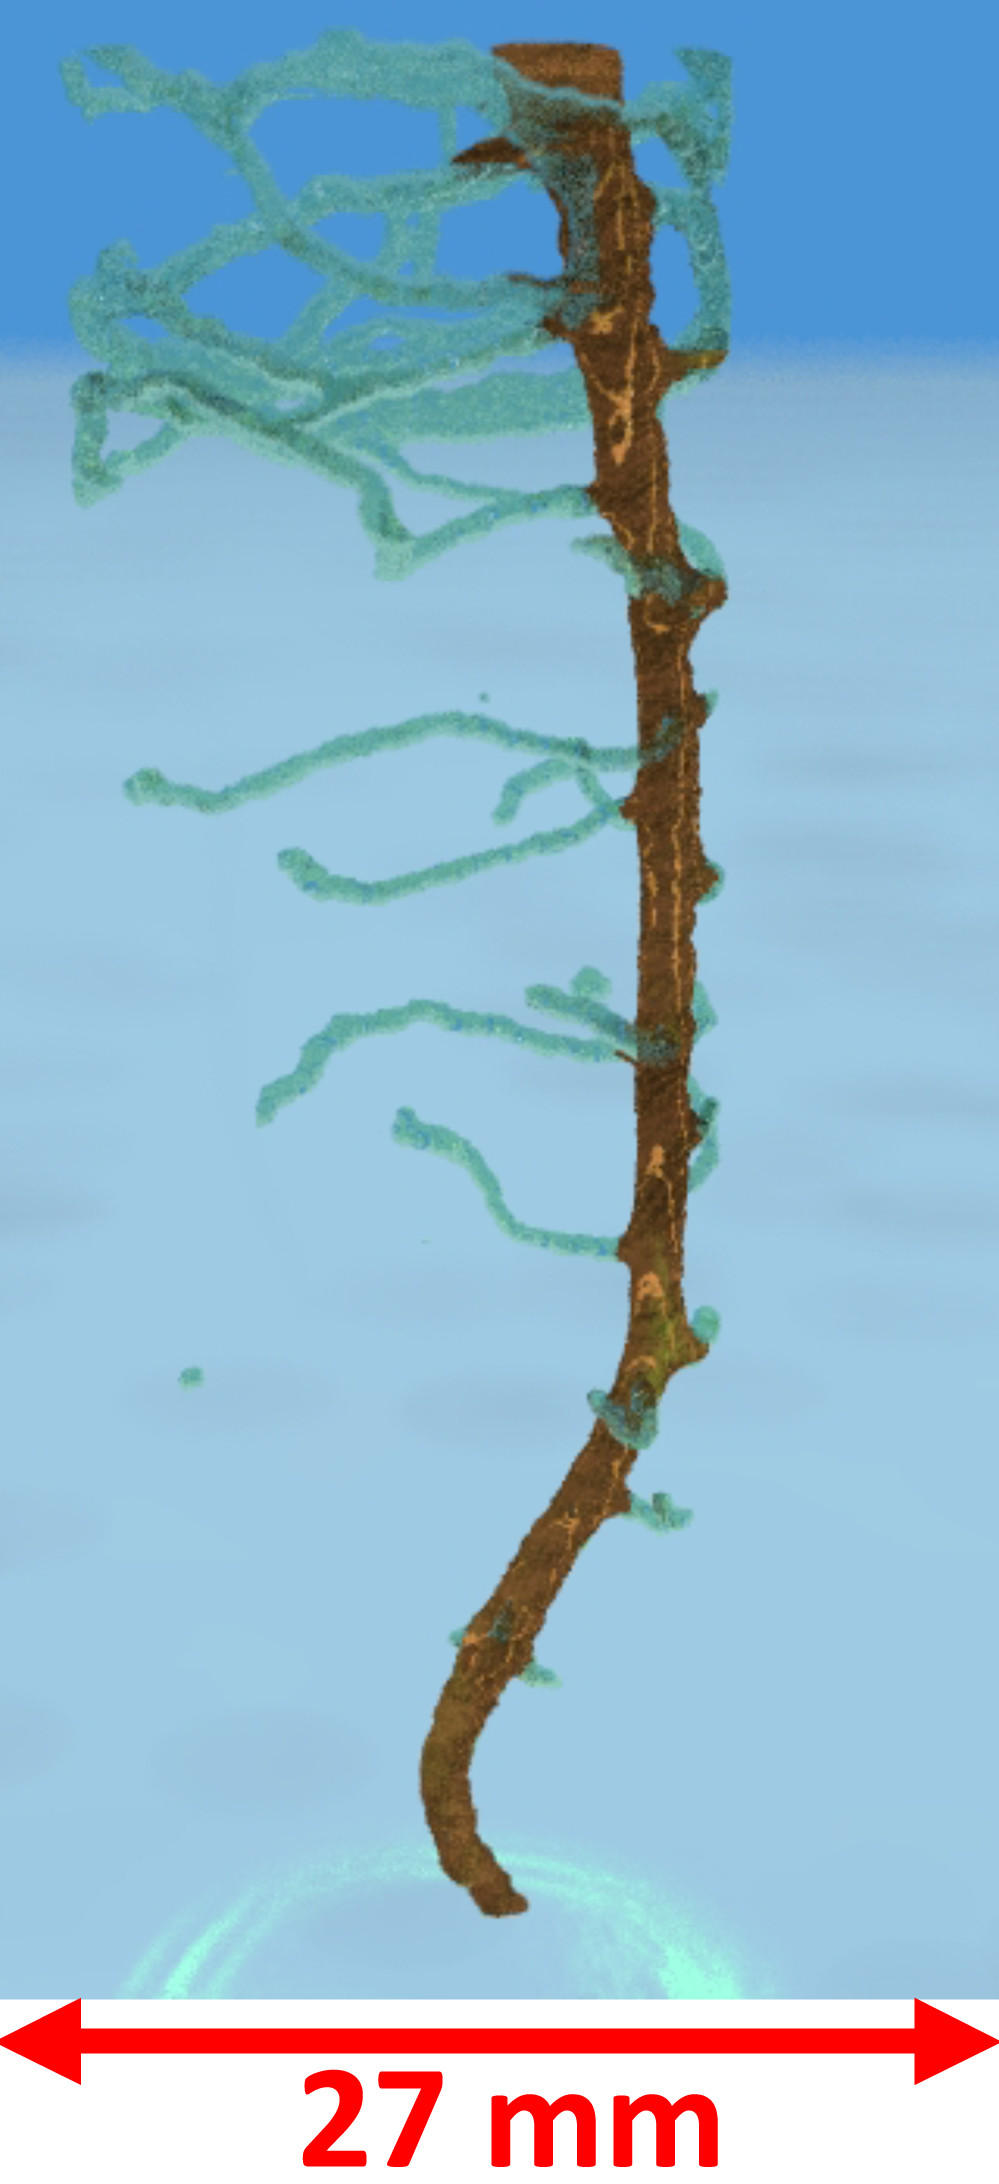 A three-dimensional representation of the roots of a chickpea plant. The image was obtained with the help of neutron tomography, by which the roots can be pictured through the soil.